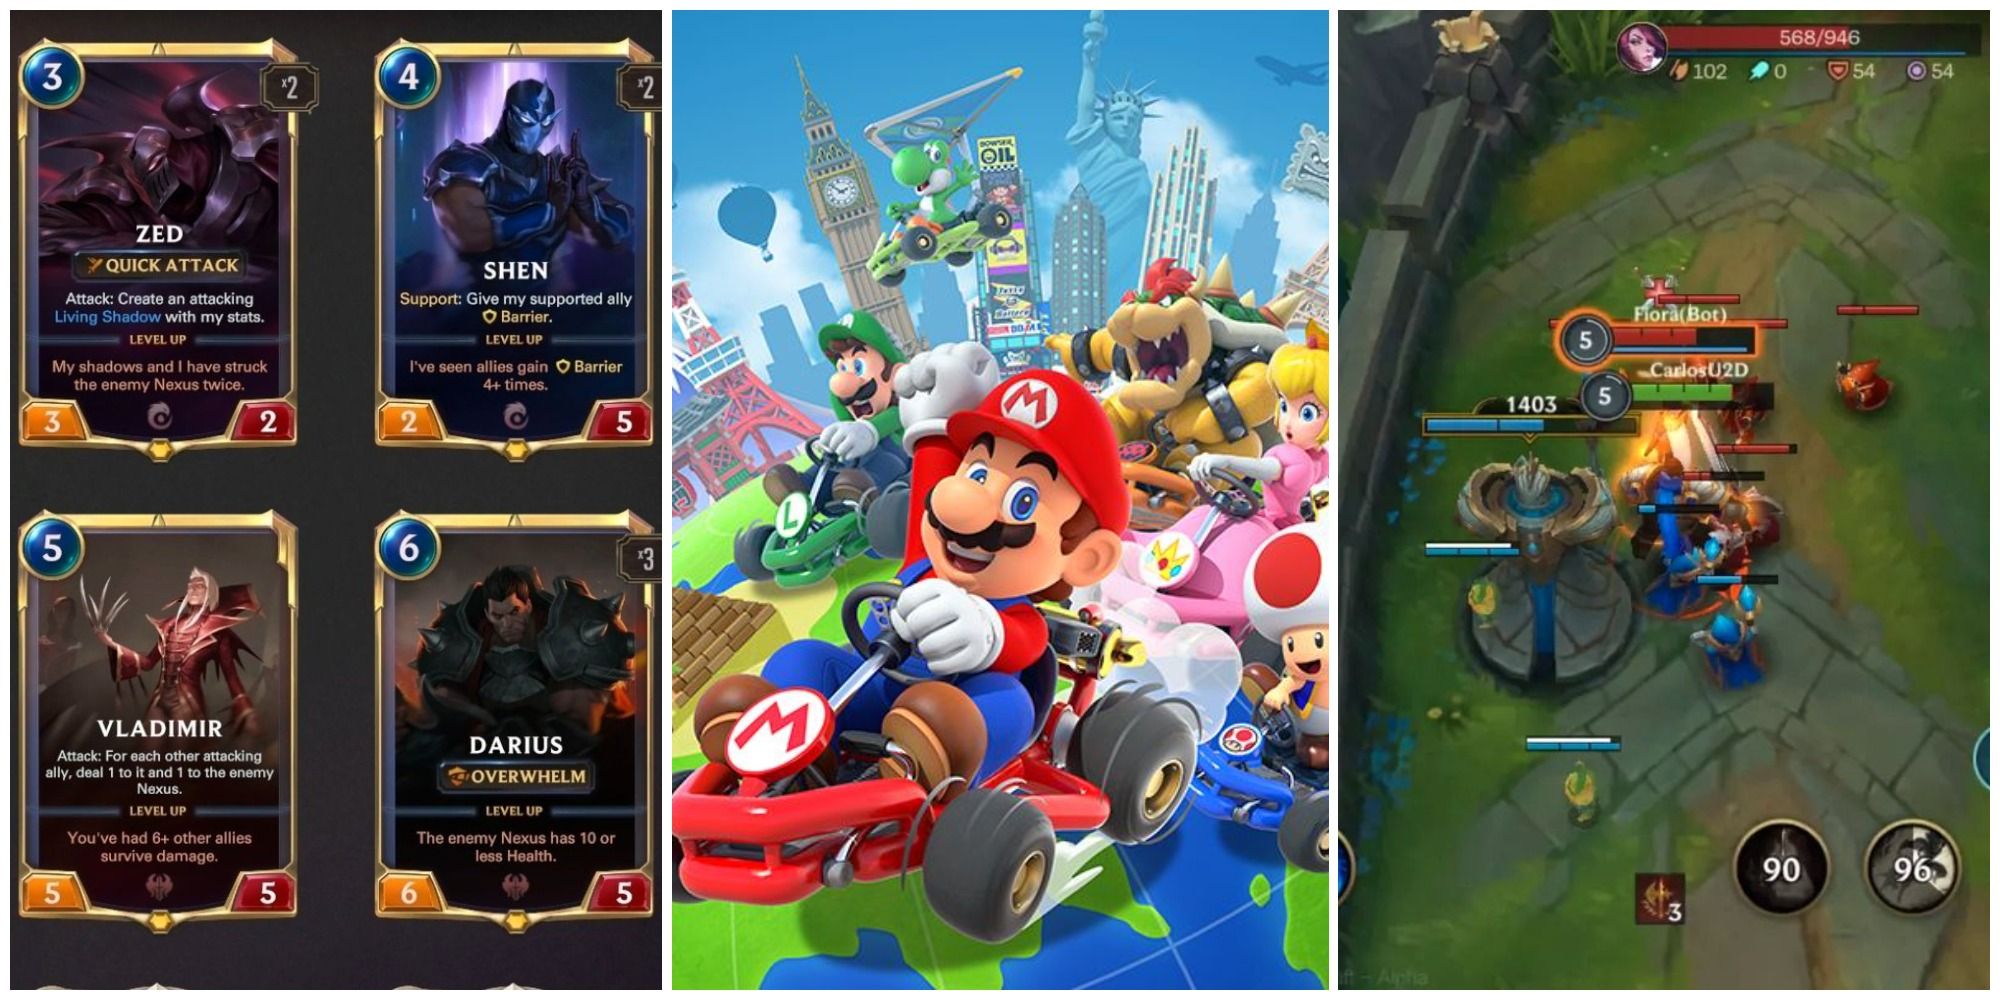 10 free-to-play mobile games for Android and iOS - GadgetMatch